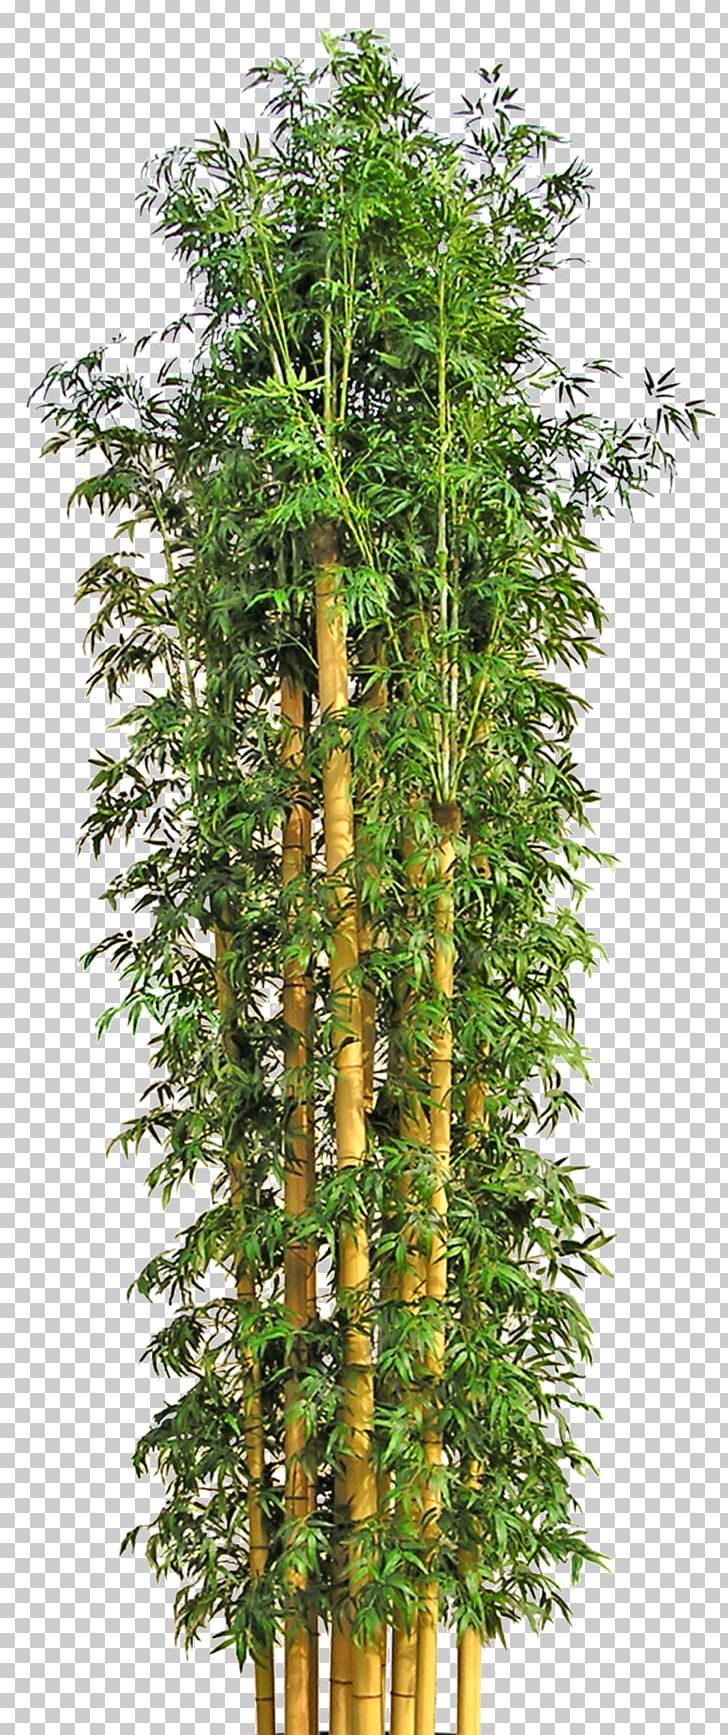 Tree Bamboo Flowerpot PNG, Clipart, Autumn Tree, Bamboe, Bamboo, Bamboo Blossom, Bonsai Free PNG Download